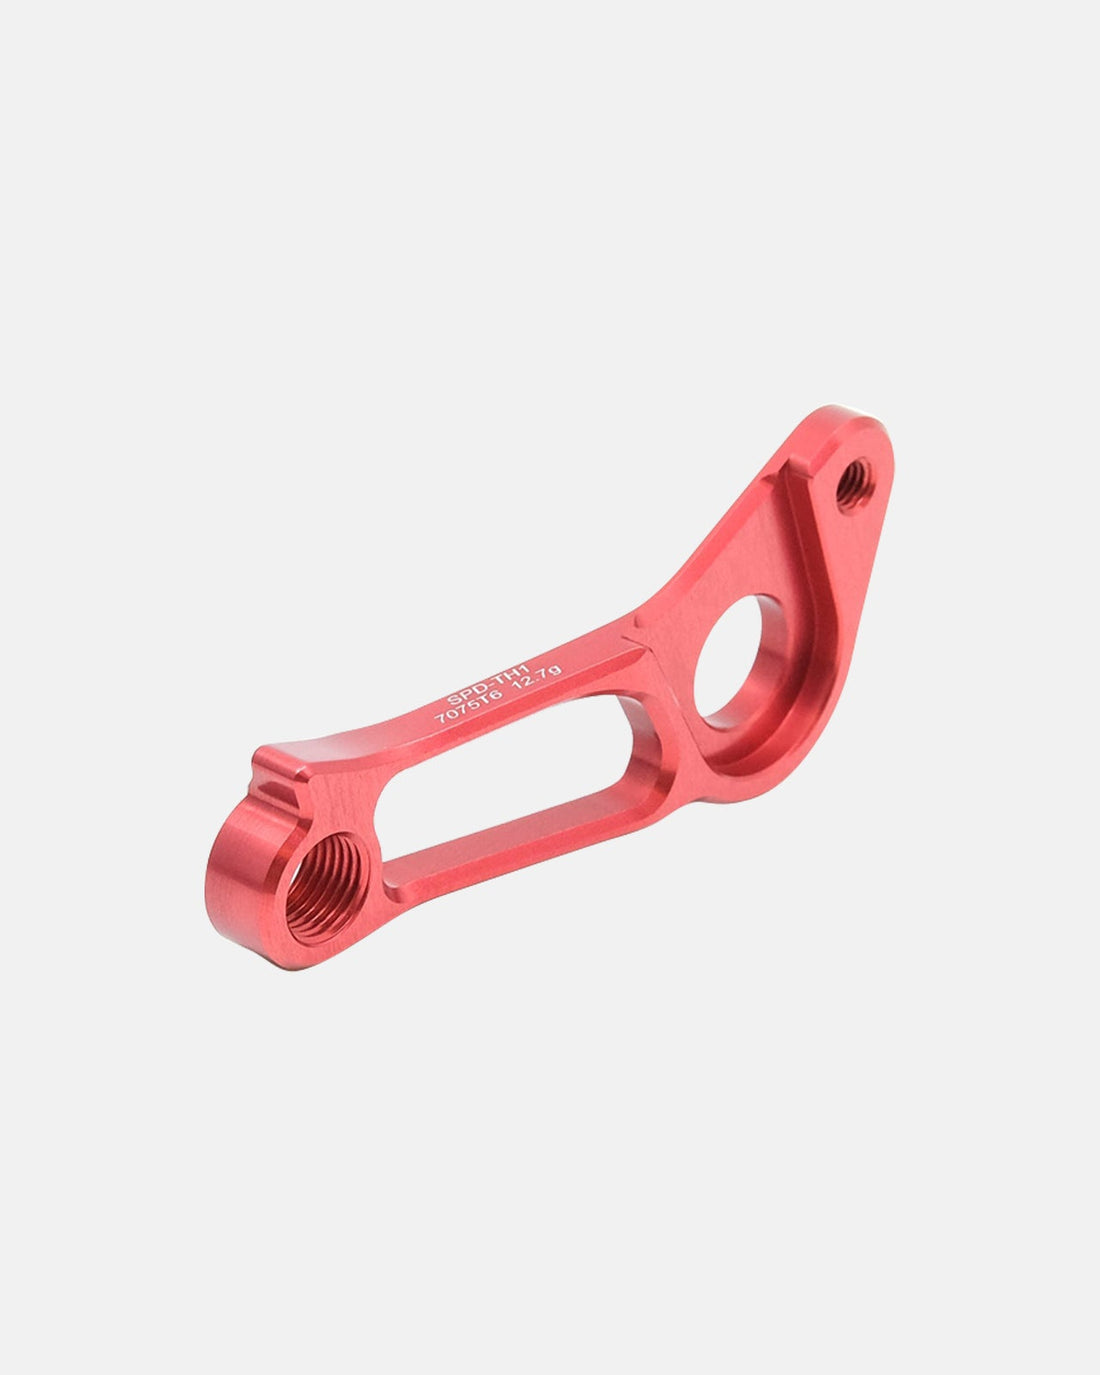 Sigeyi Specialized Direct-Mount Derailleur Hanger - Red